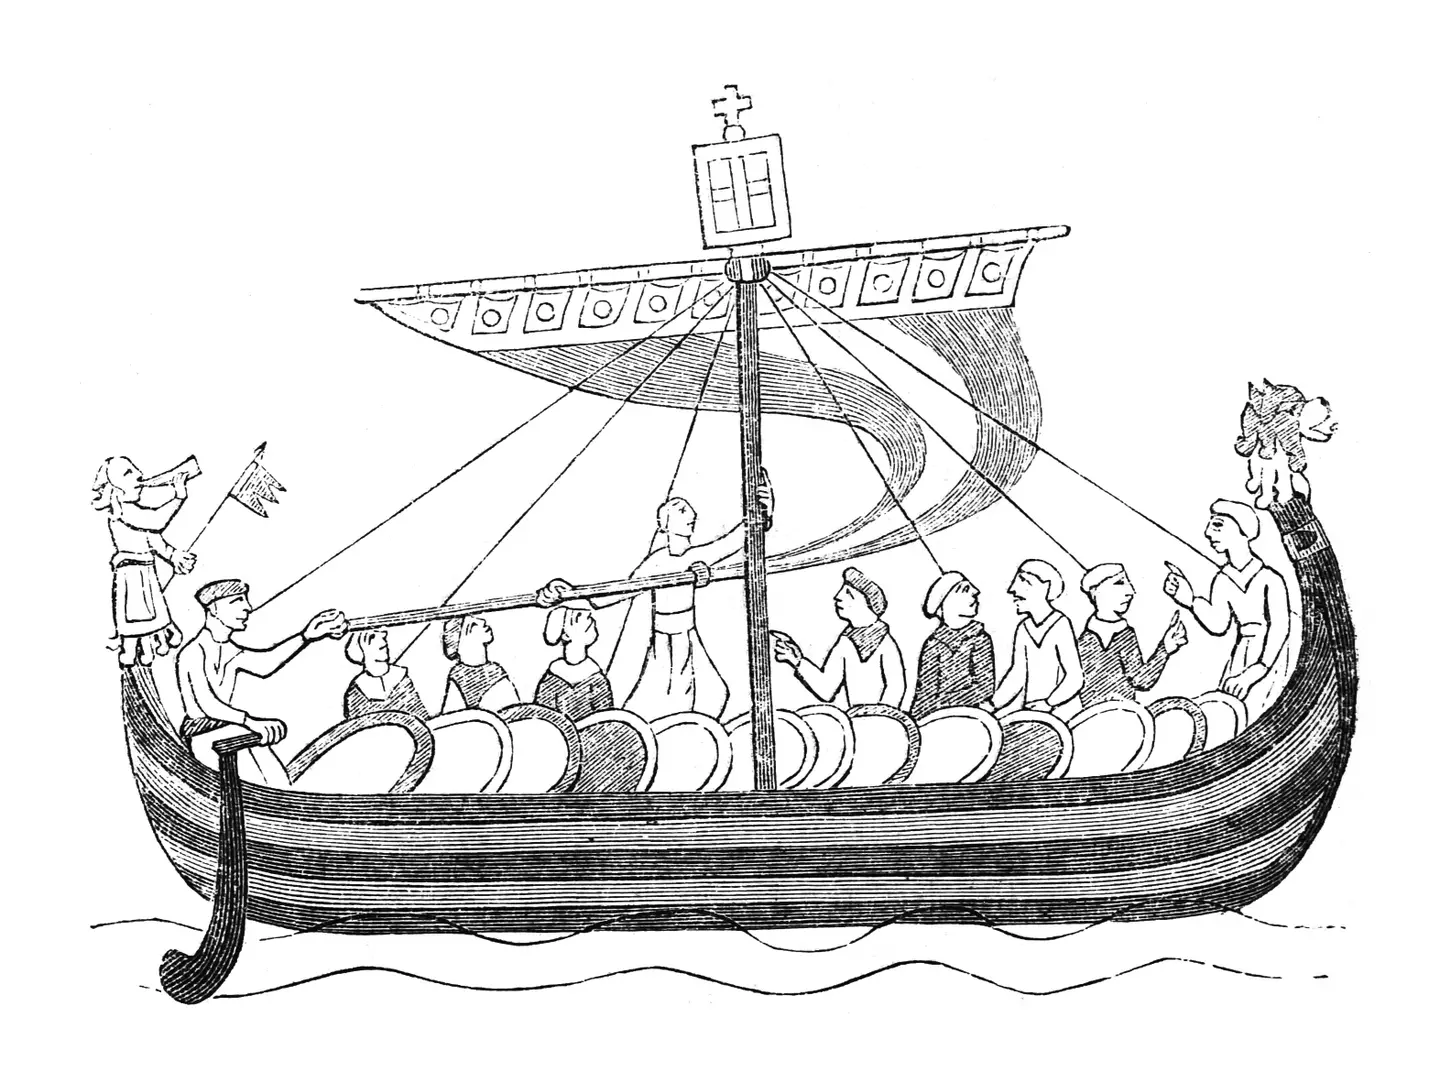 A depiction of an early medieval ship from the Bayeaux Tapestry - note the steering oar on the right-hand side of the ship.